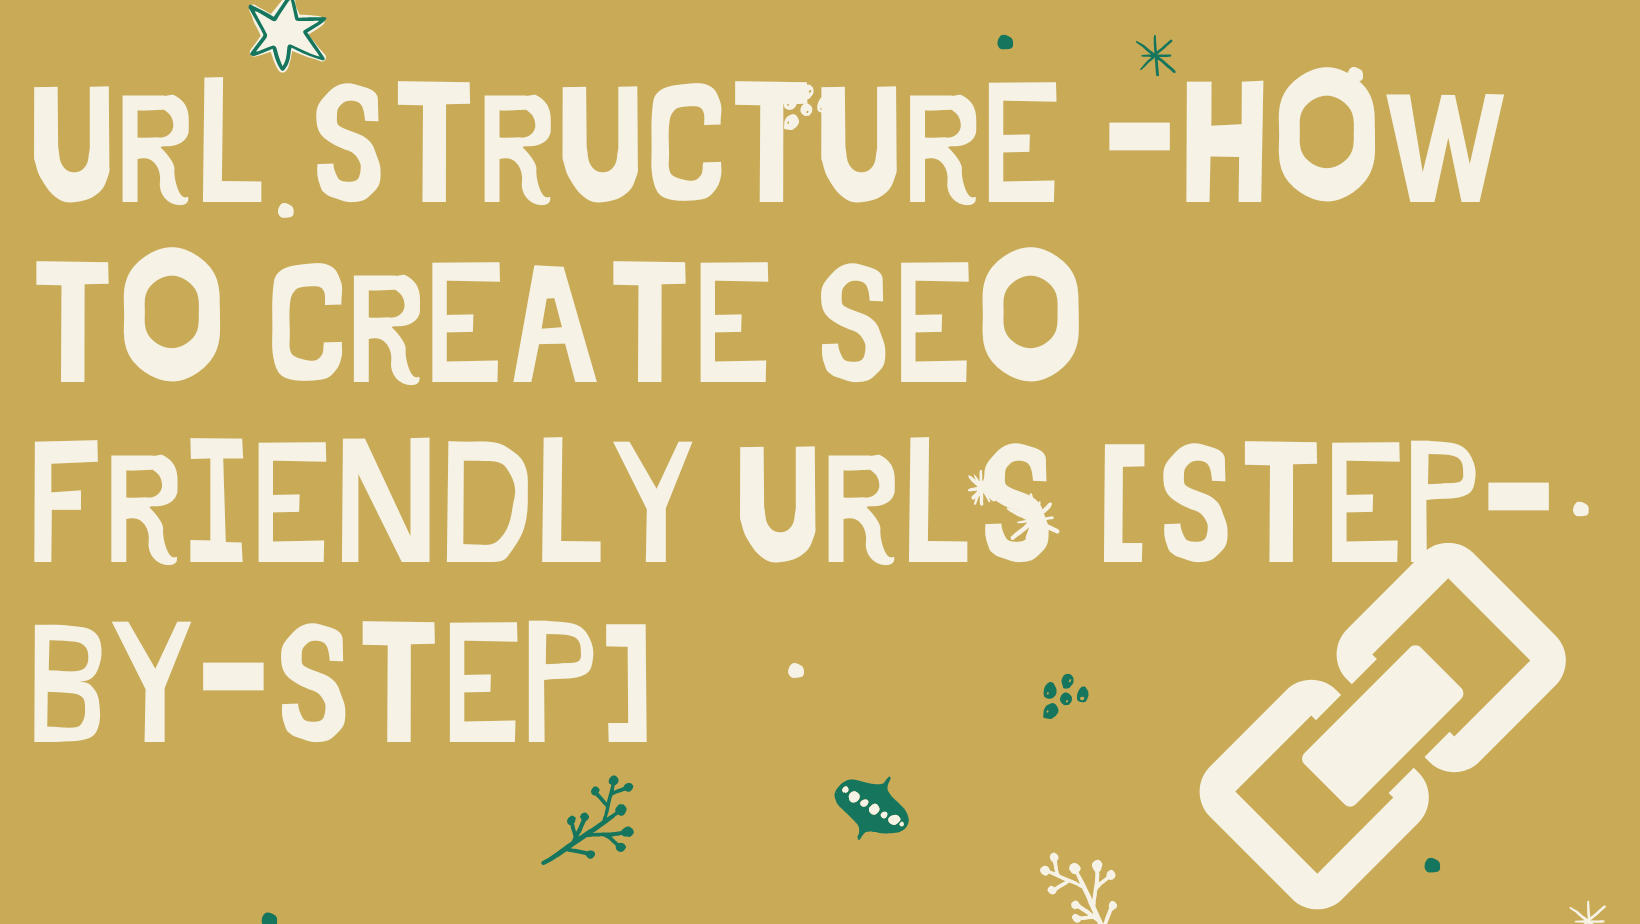 URL Structure -How to Create SEO Friendly URLs [Step-by-step]